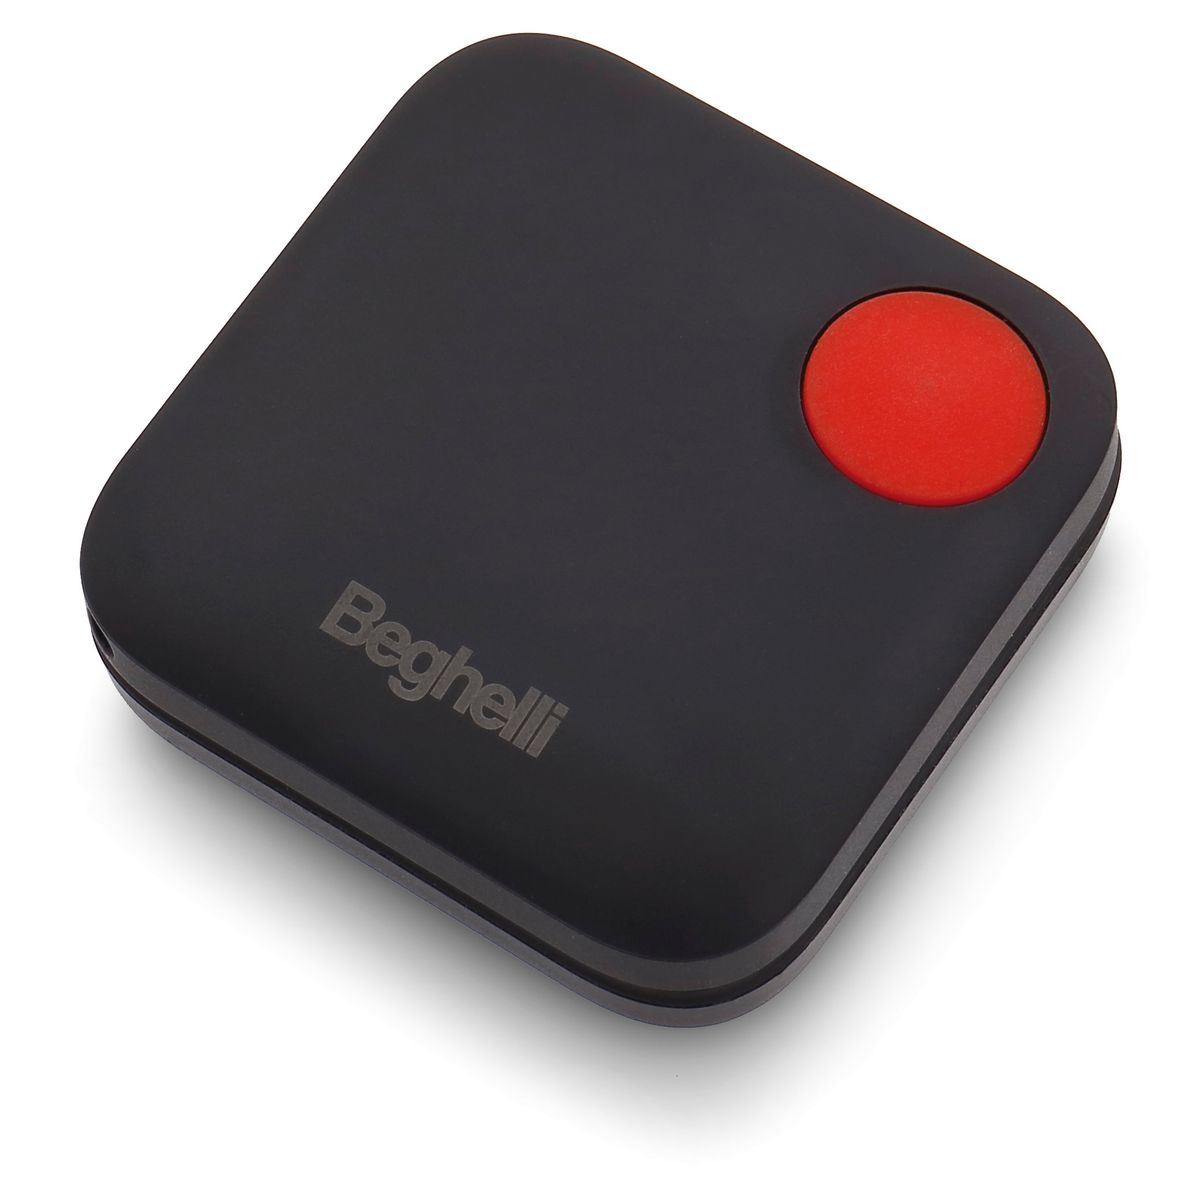 Beghelli Remote trigger to retrofit help by simply pressing the red button on the remote or on the device.